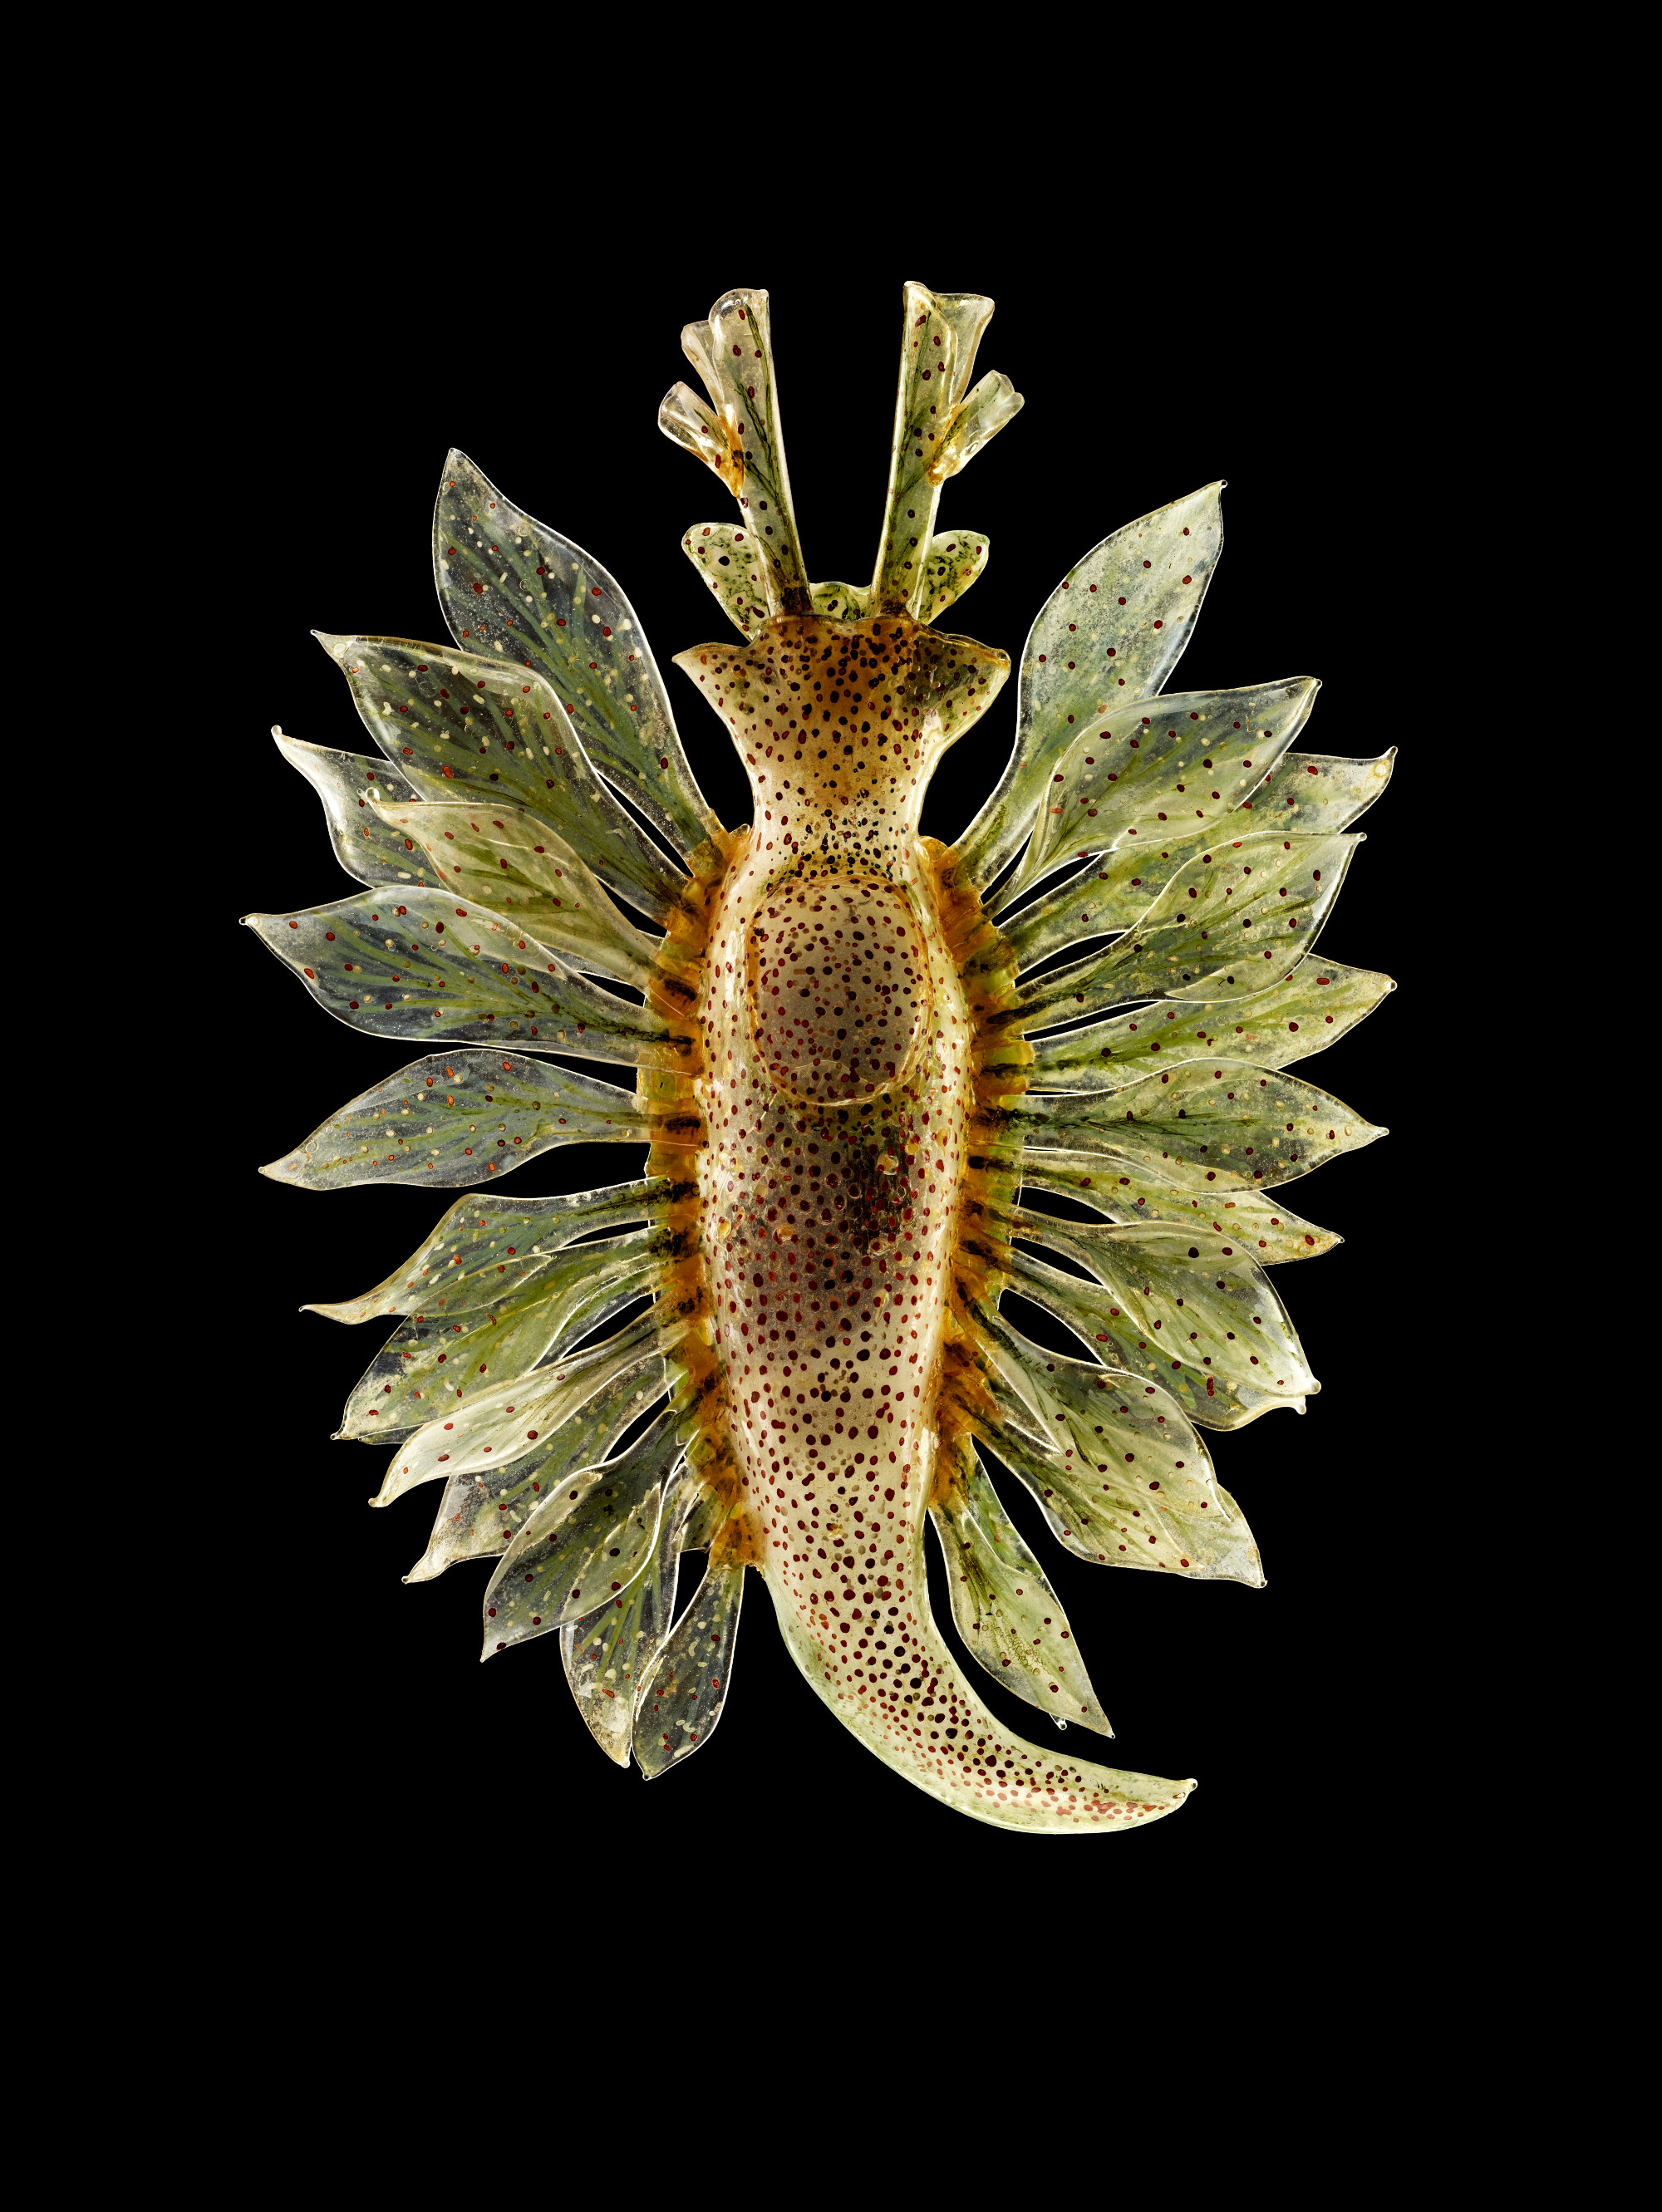 A type of sea slug called the spotted sacoglossan (Caliphylla mediterranea), in glass. Photo by Guido Mocafico, courtesy of the Natural History Museum of Ireland. Image file courtesy of A Sea of Glass, by Drew Harvell